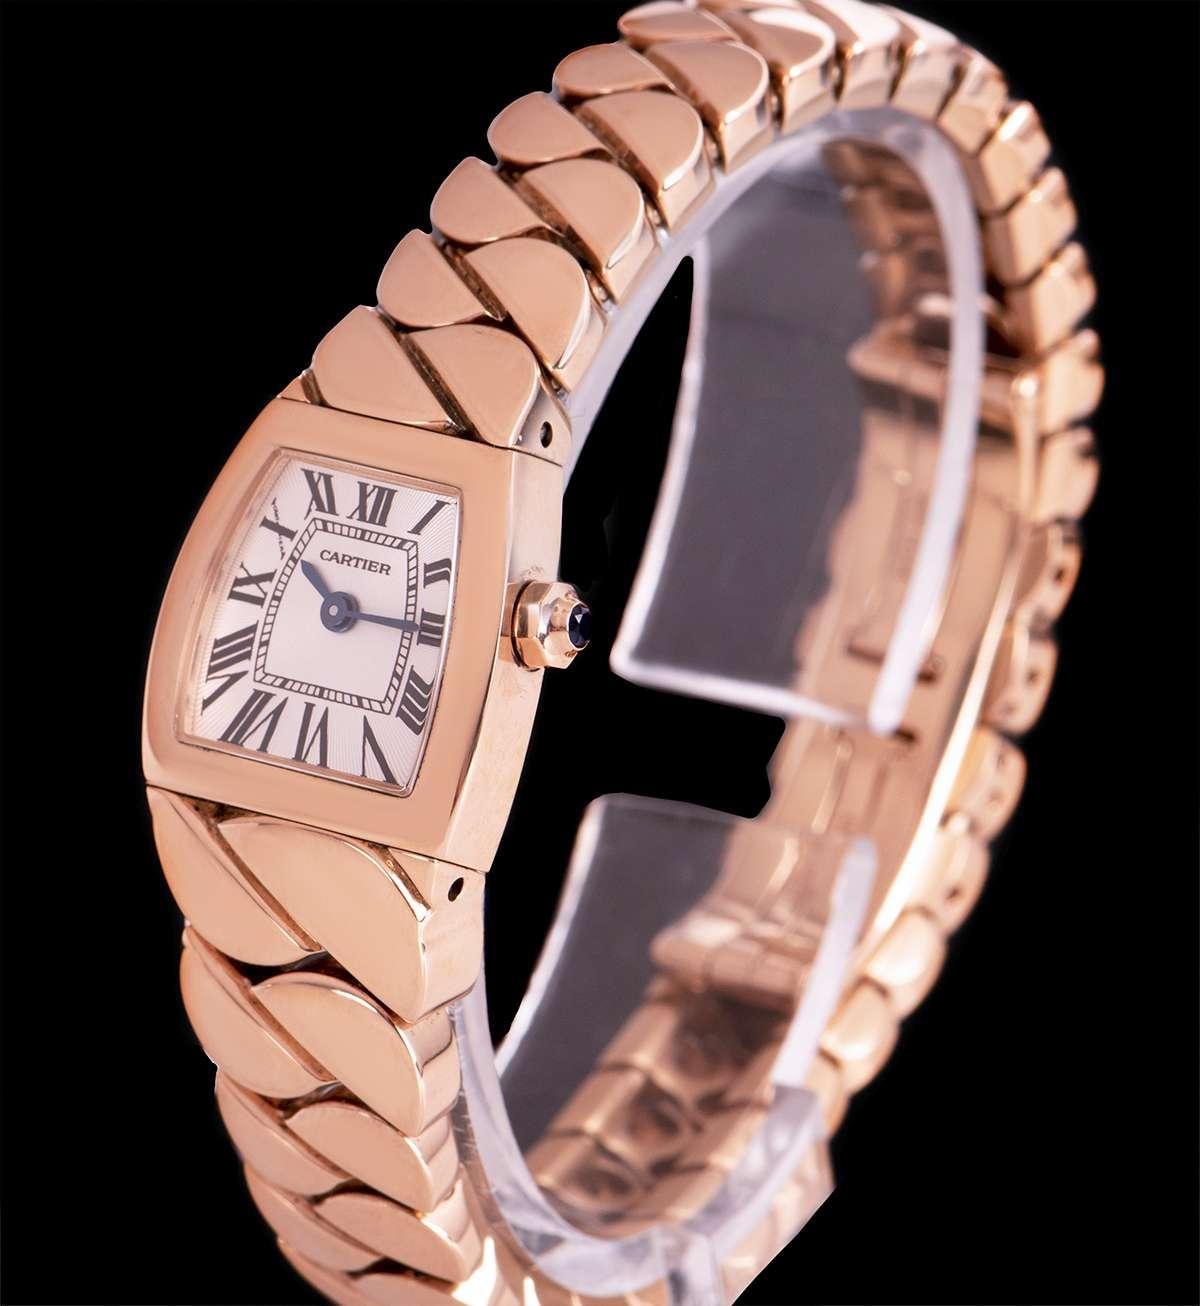 A 18 mm Mini La Dona women's wristwatch, by Cartier

Crafted from 18k rose gold, the watch features a silver dial with sapphire crystal, an 18k rose gold bracelet with a concealed double deployant clasp.

The watch is powered by a quartz movement,